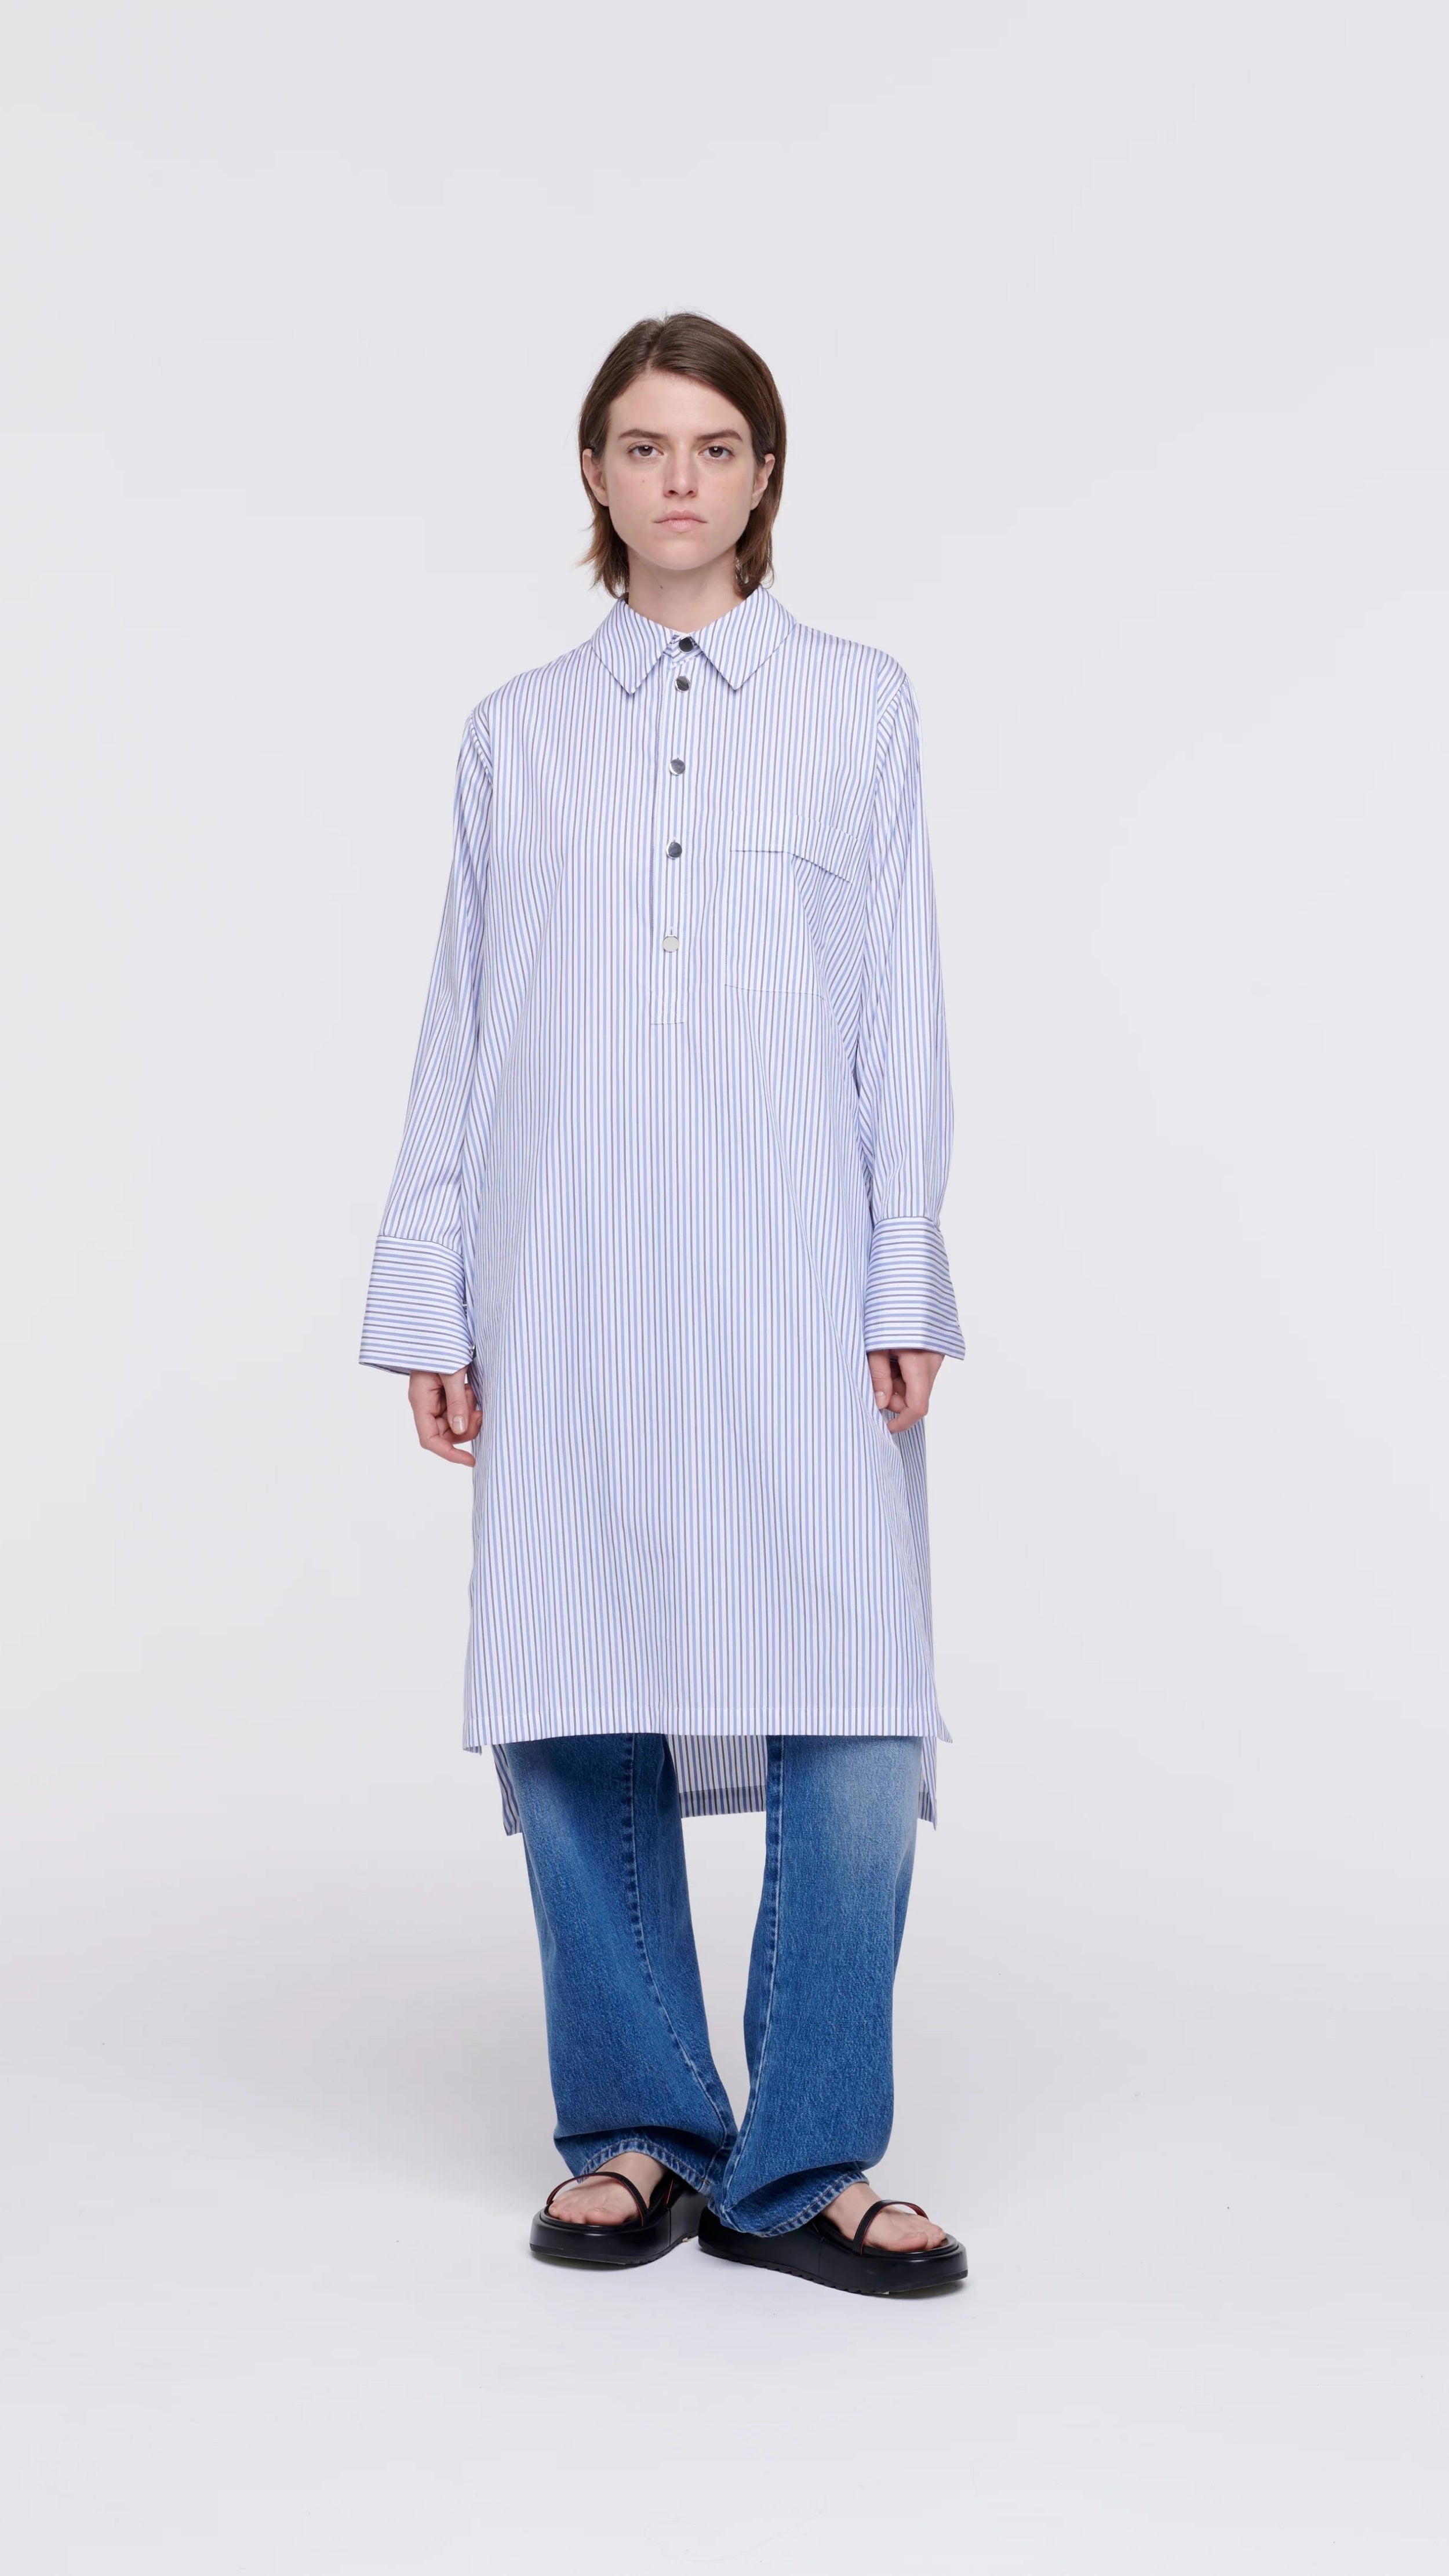 Plan C Striped Cotton Poplin Shirt Dress Classic yet modern shirt dress made from soft cotton poplin in pale blue and white stripes. It has three silver buttons, a collared neckline, long cuffs, and a breast pocket. It's designed with a relaxed fit and side pockets. Shown on model facing front